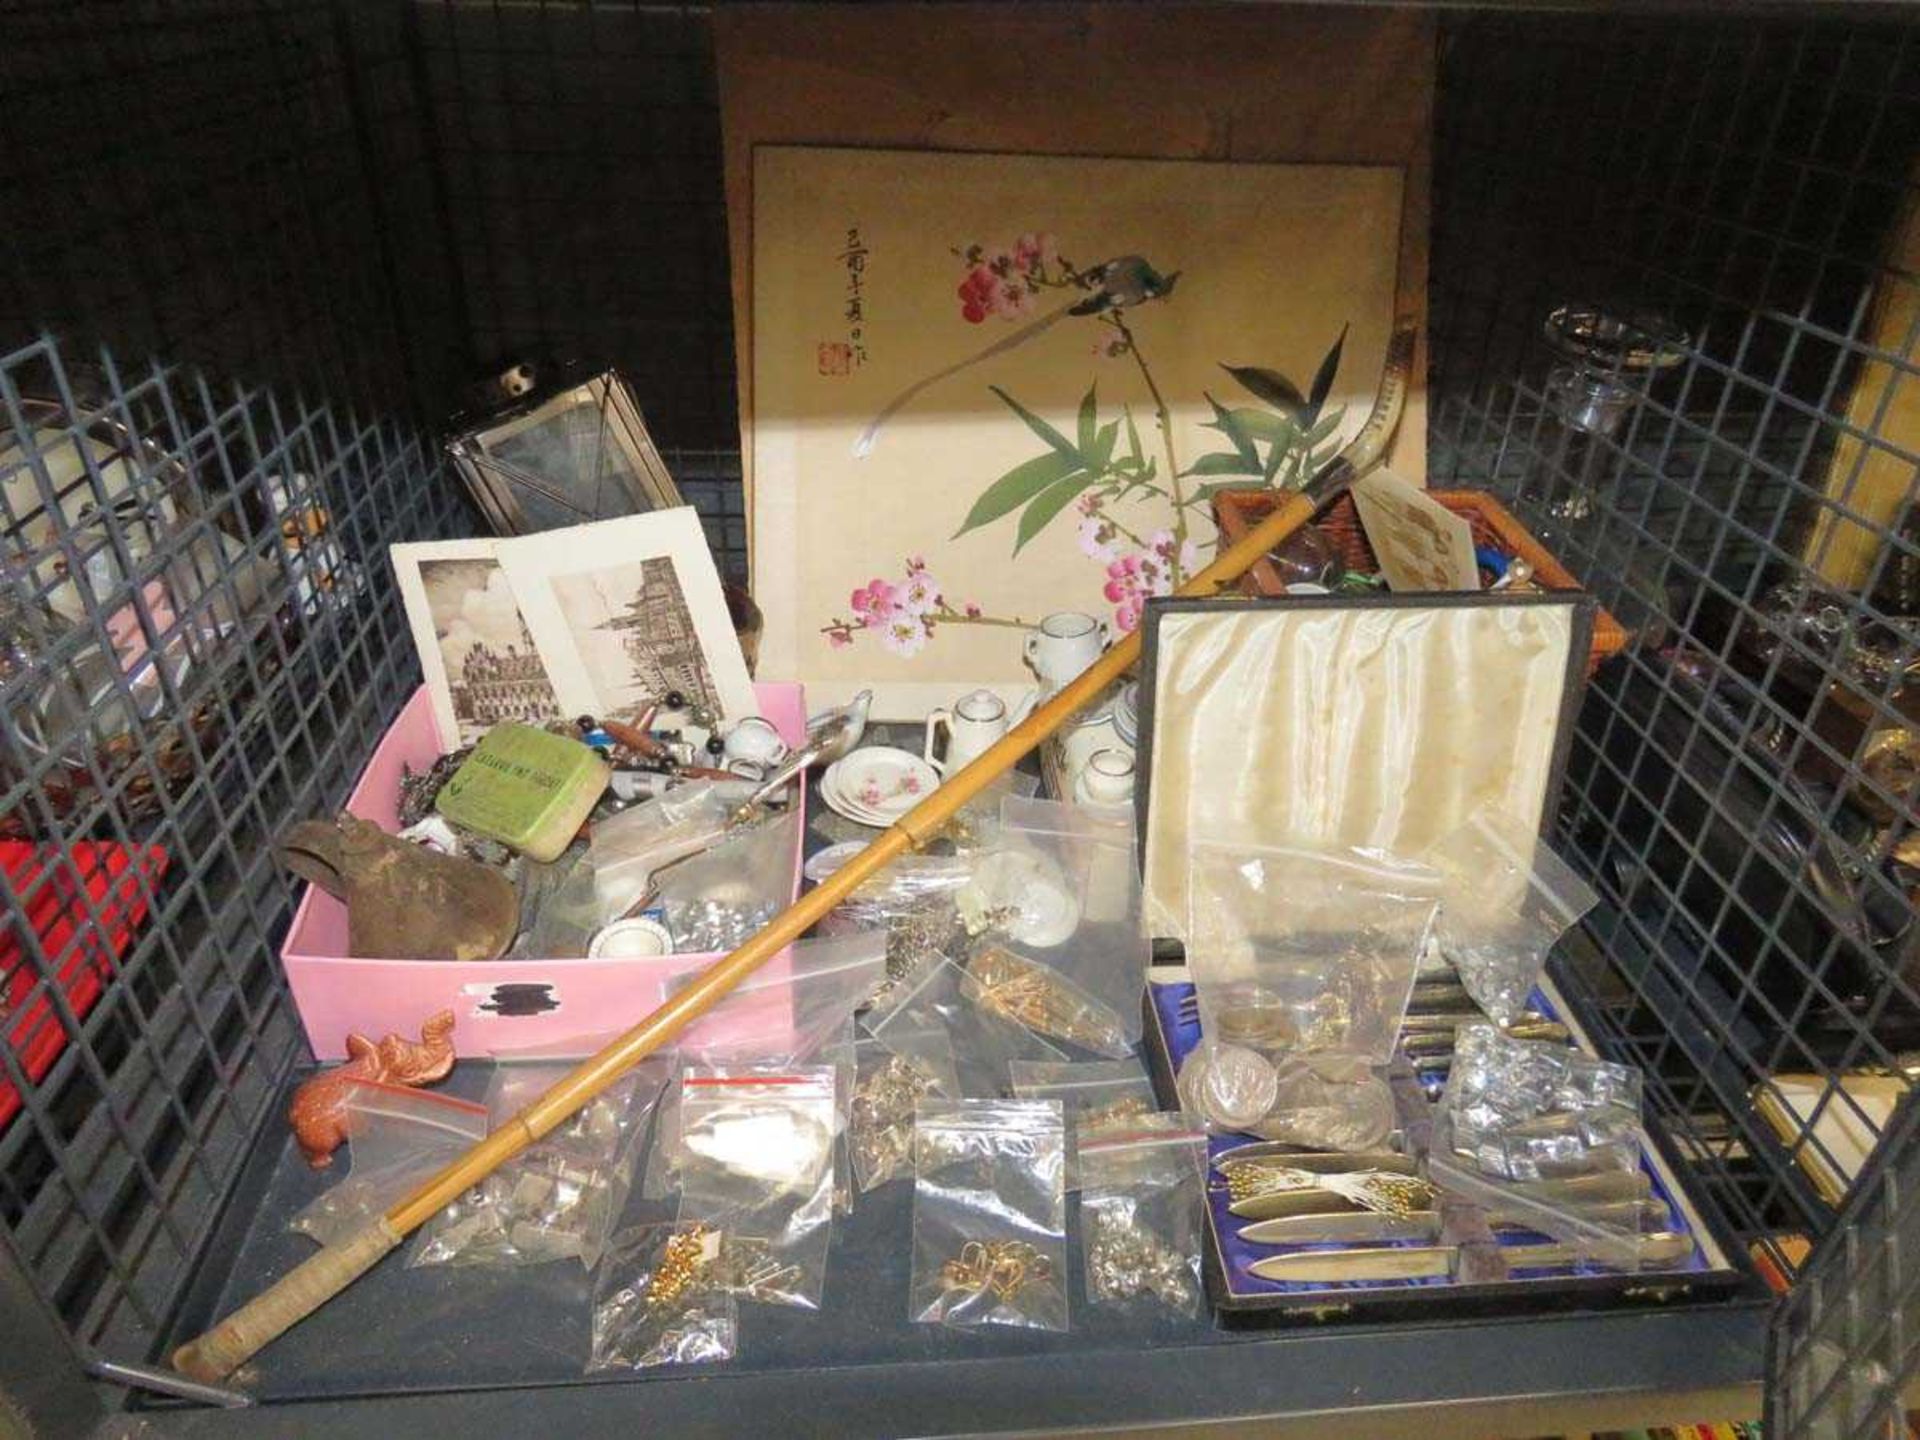 Cage containing coinage, cased cake knife and fork set, Chinese print, riding crop, jewellery and